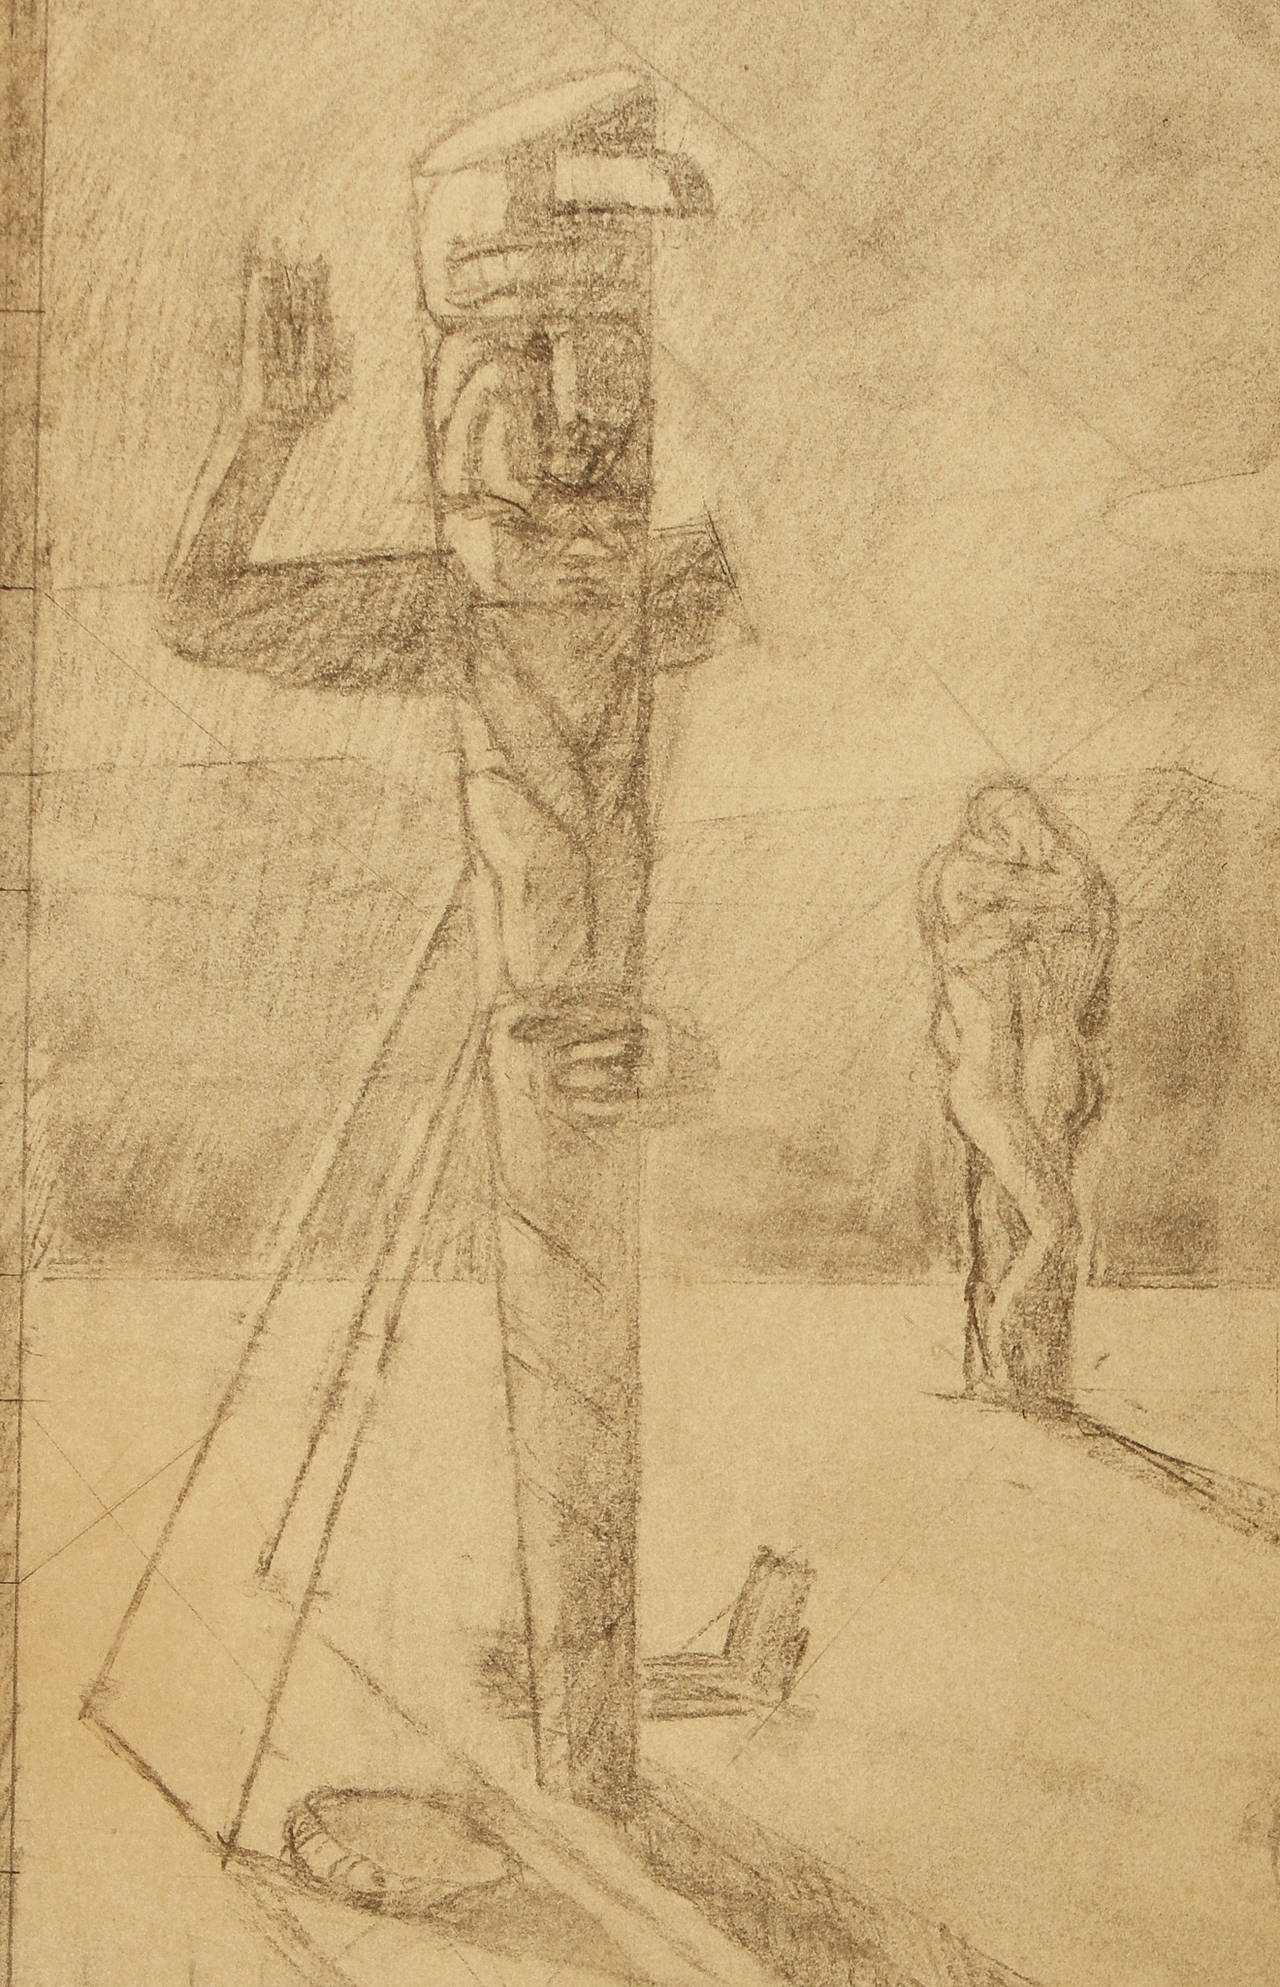 Best known for his WPA and World's Fair murals, this drawing is a rare example of Dunbar Beck's foray into Surrealism. His depiction of a nude male facing a Totem pole with one arm outstretched and one arm broken off, and an entwined nude couple in